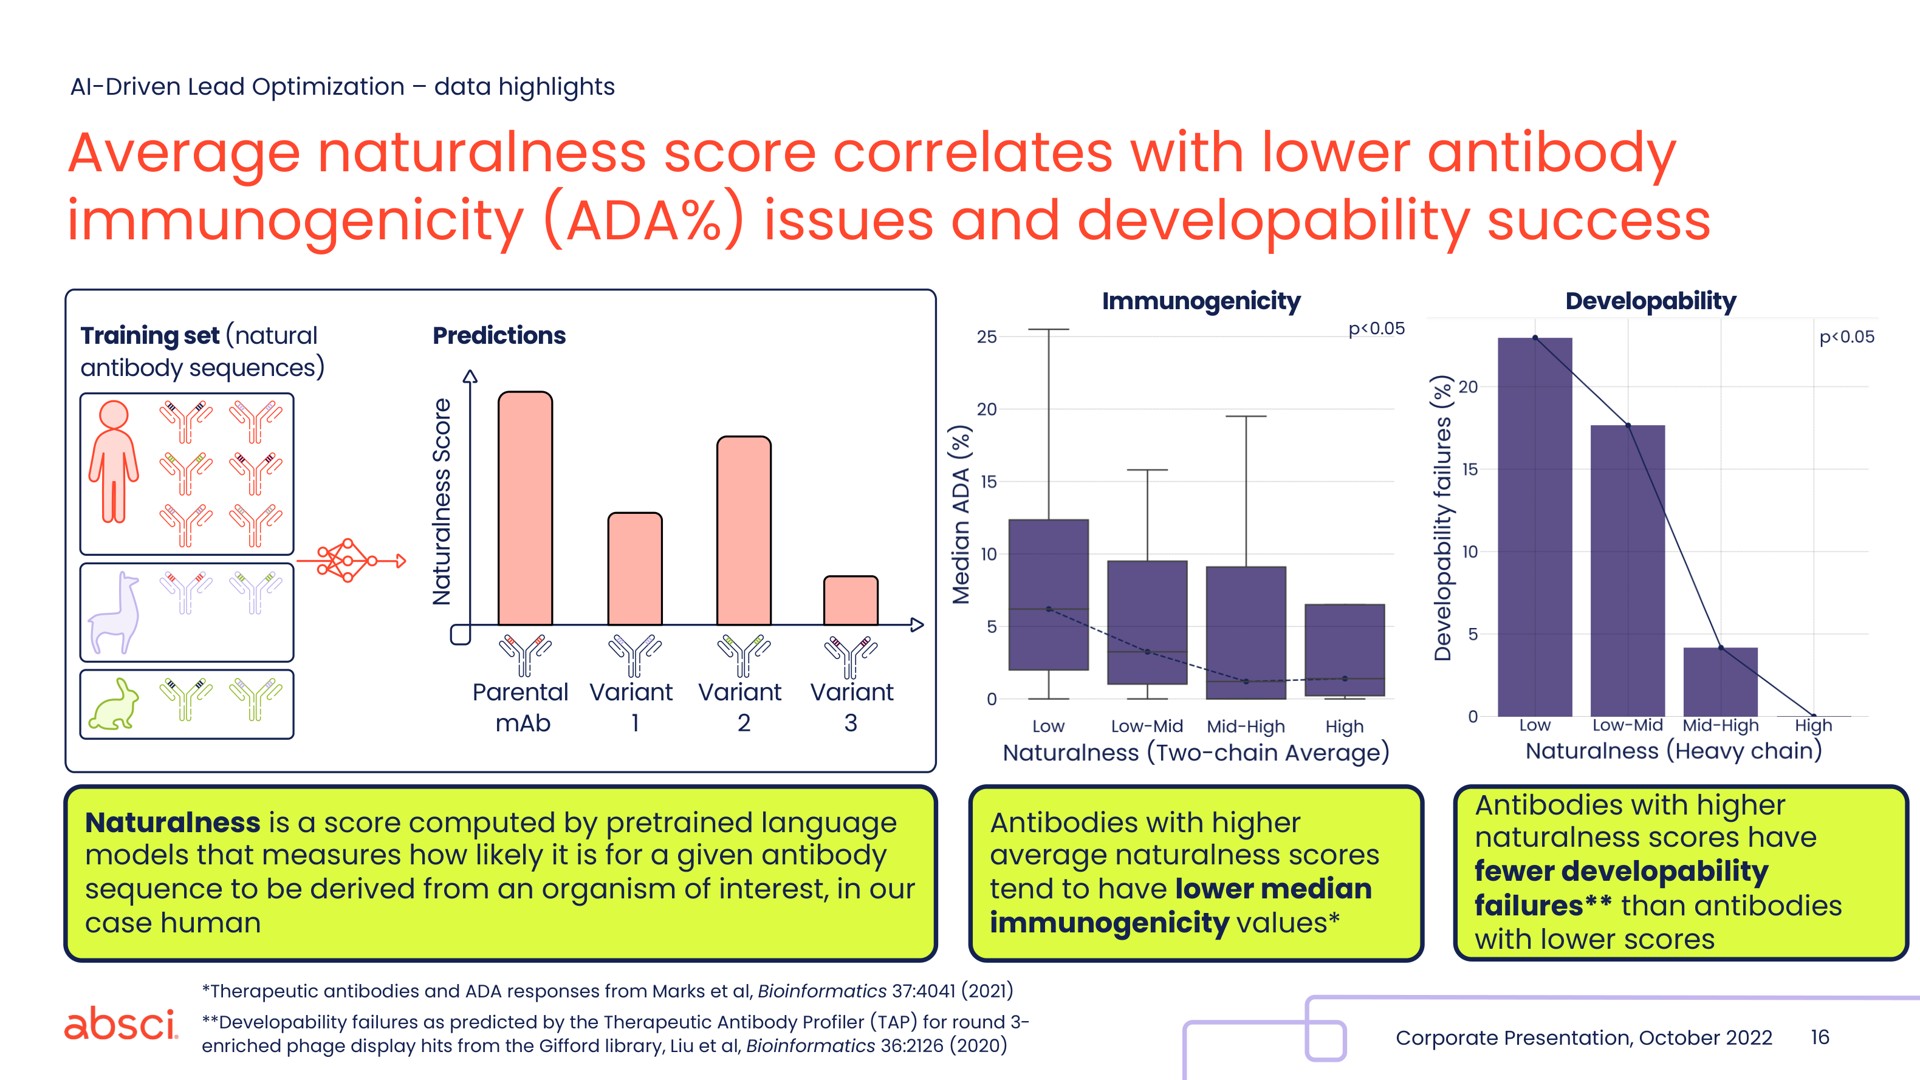 average naturalness score correlates with lower antibody immunogenicity issues and developability success a | Absci